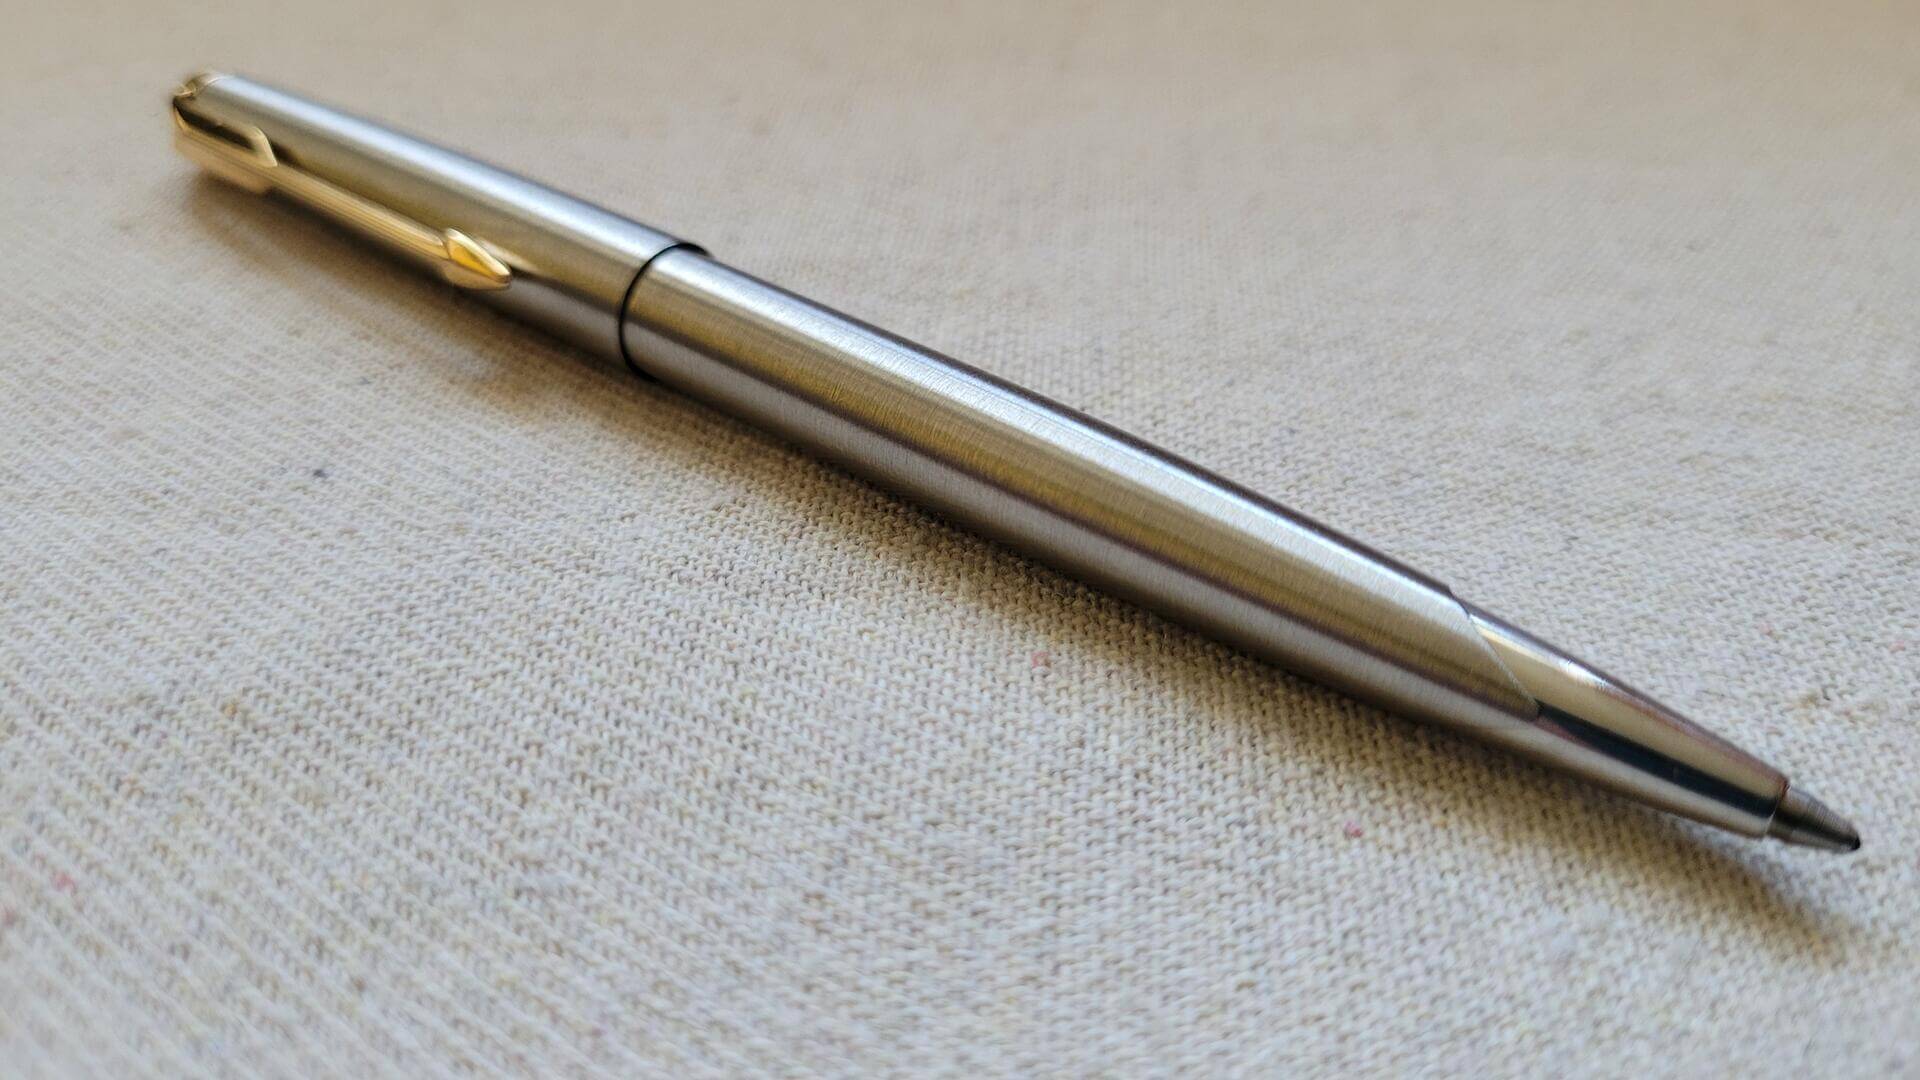 Beautiful classic chrome Parker Falcon cap actuated ballpoint pen with golden arrow clip and nice unique design transition from brushed barrel to polished steel tip. Rare vintage made in USA collectible writing equipment